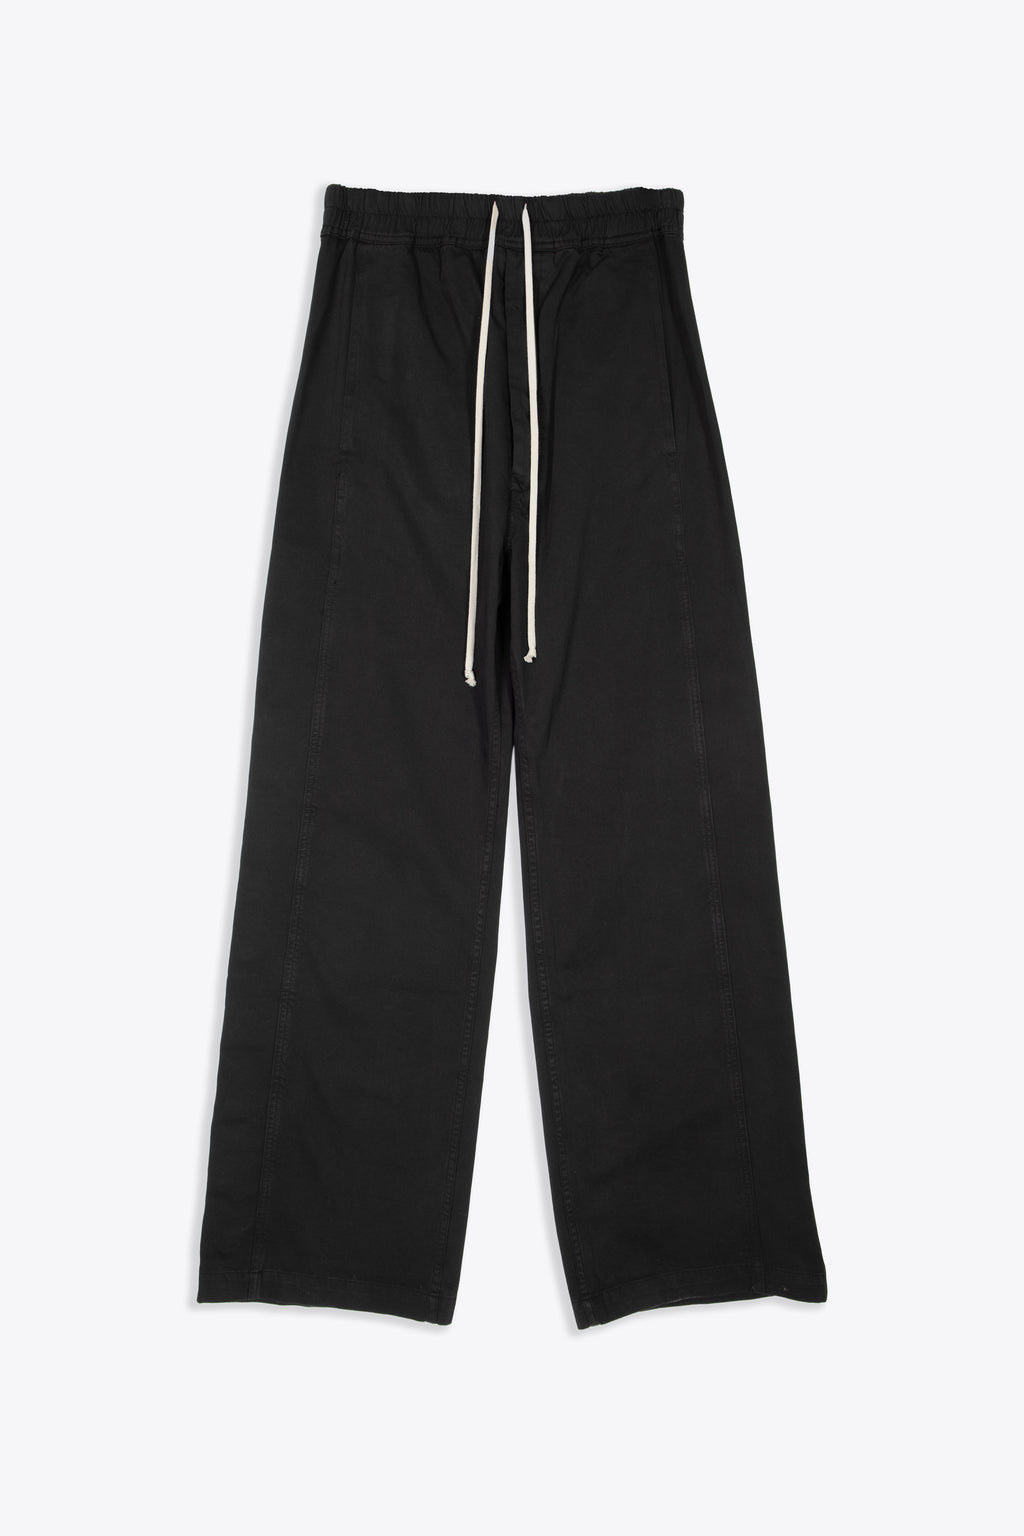 alt-image__Black-cotton-twill-pants-with-side-snaps---Pusher-Pants